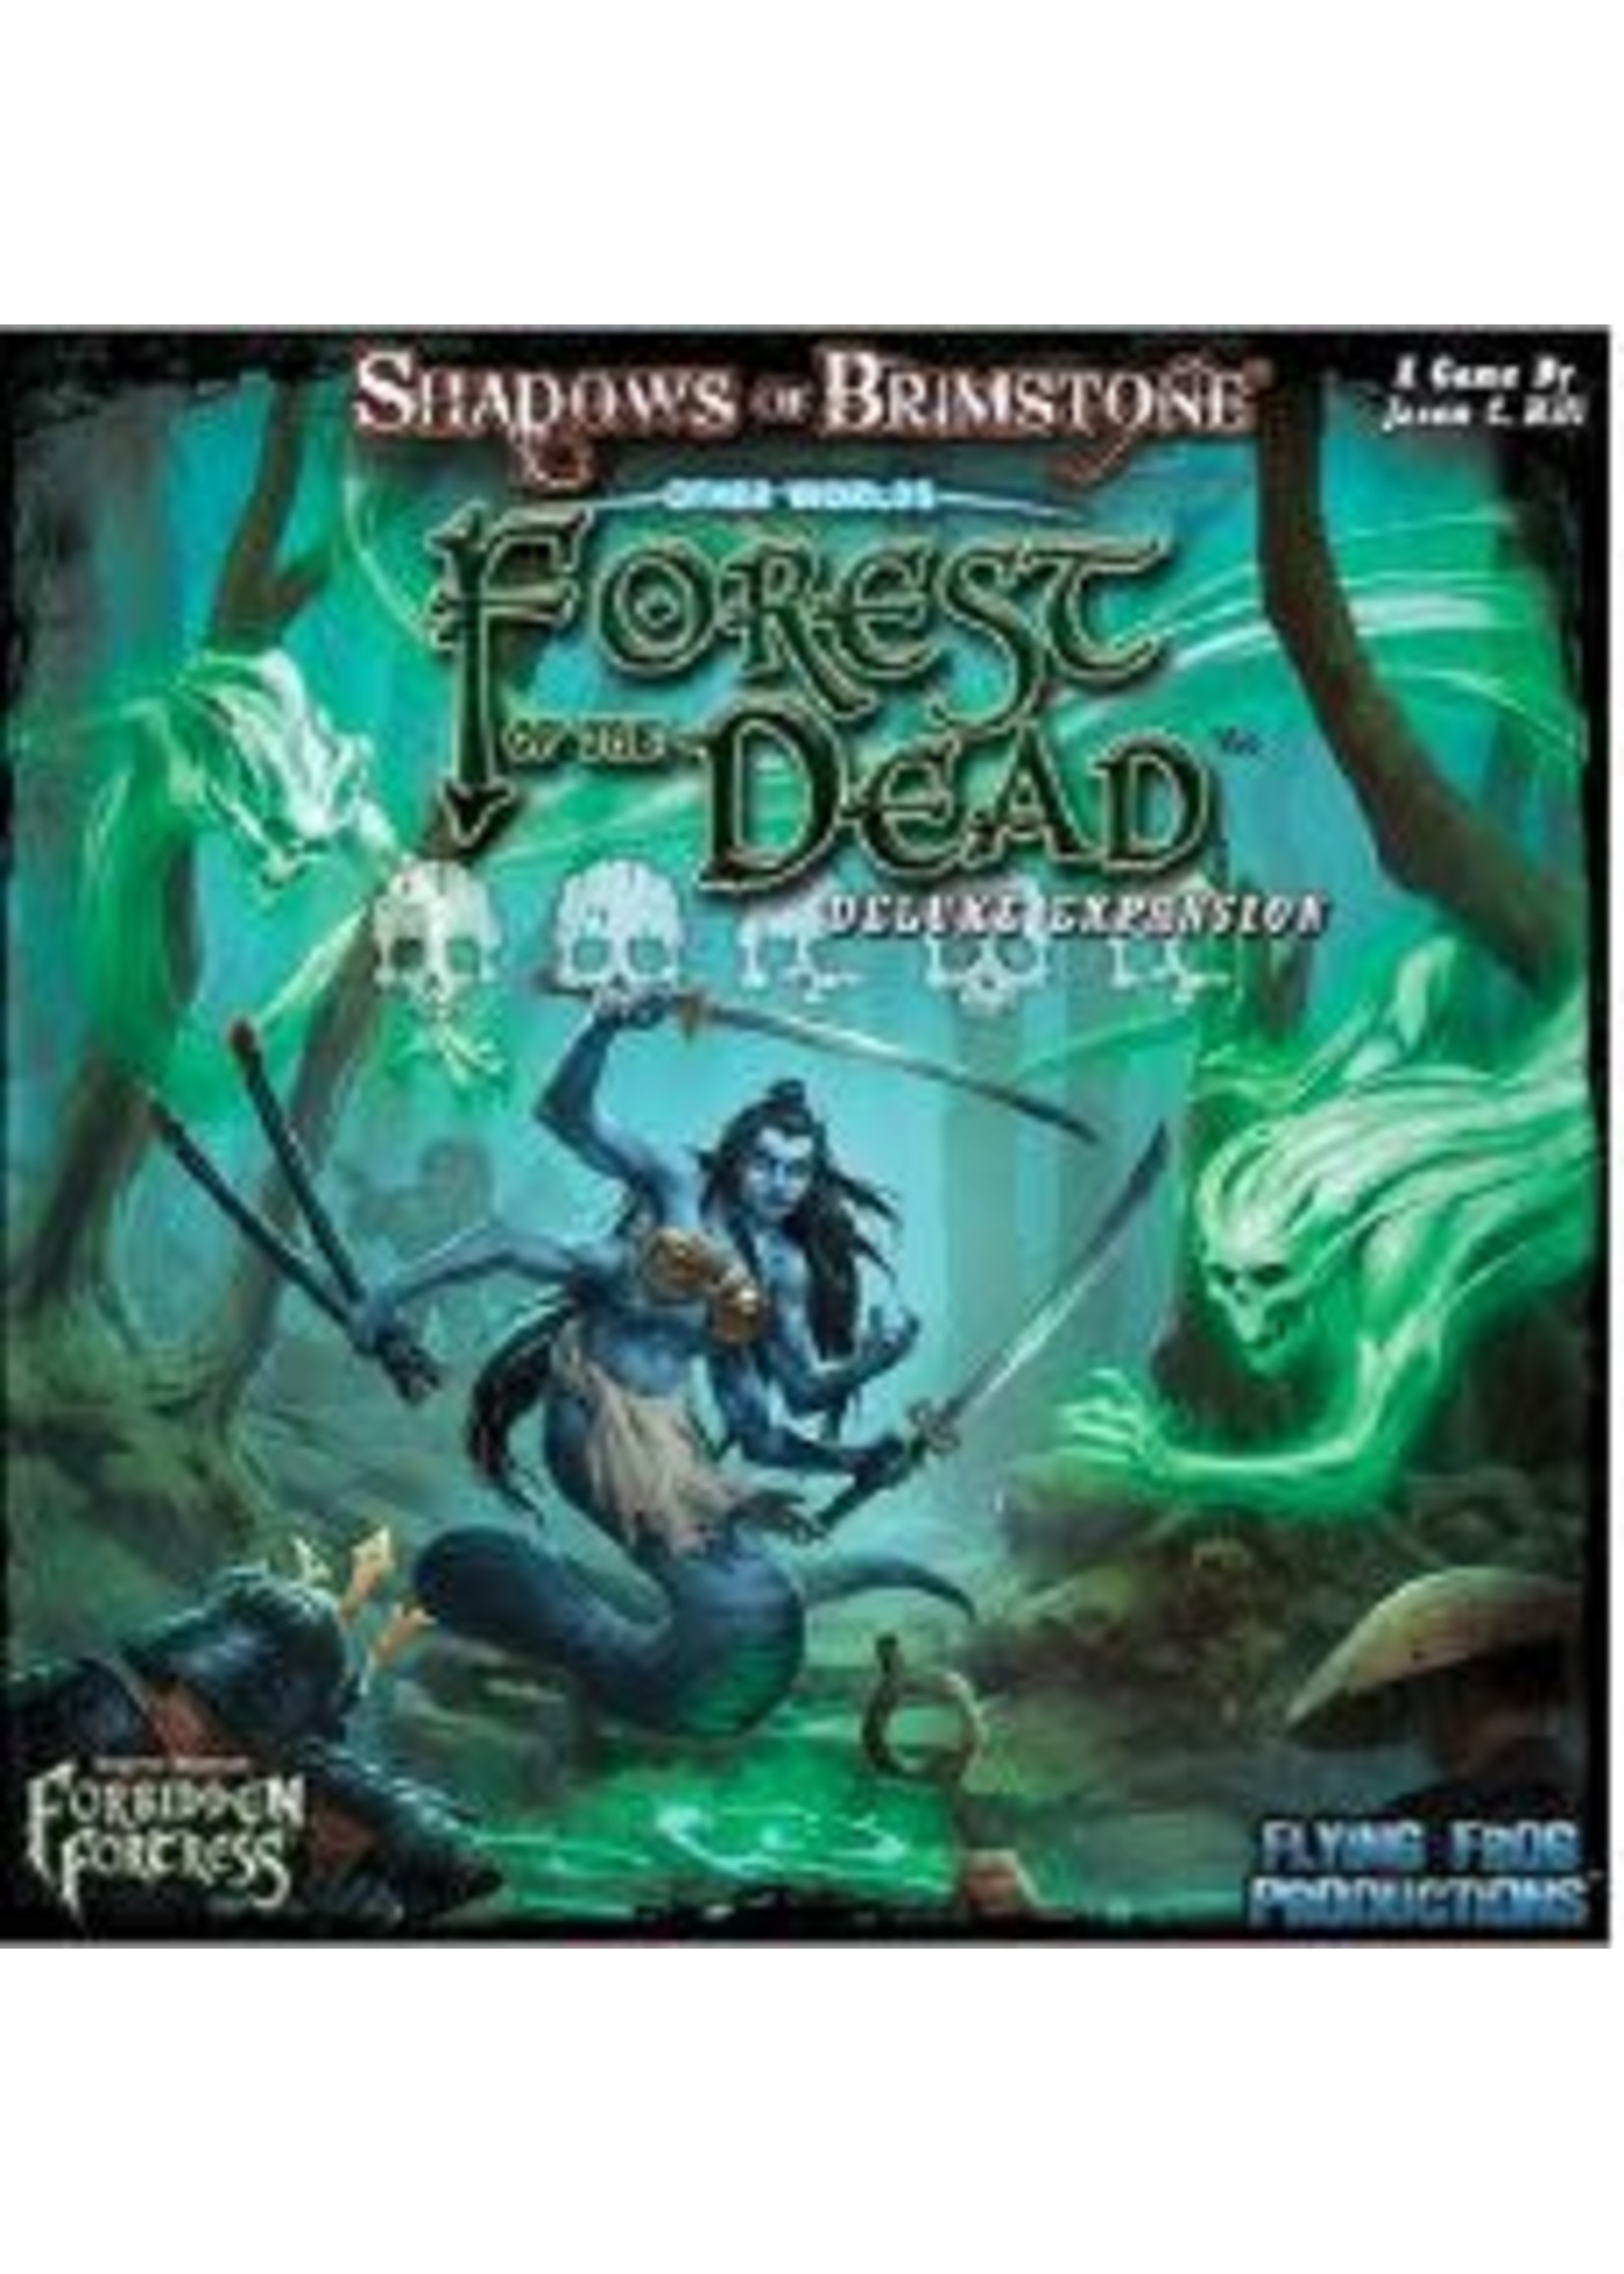 Flying Frog Forest of the Dead: Deluxe Expansion - Other Worlds - Shadows of Brimstone